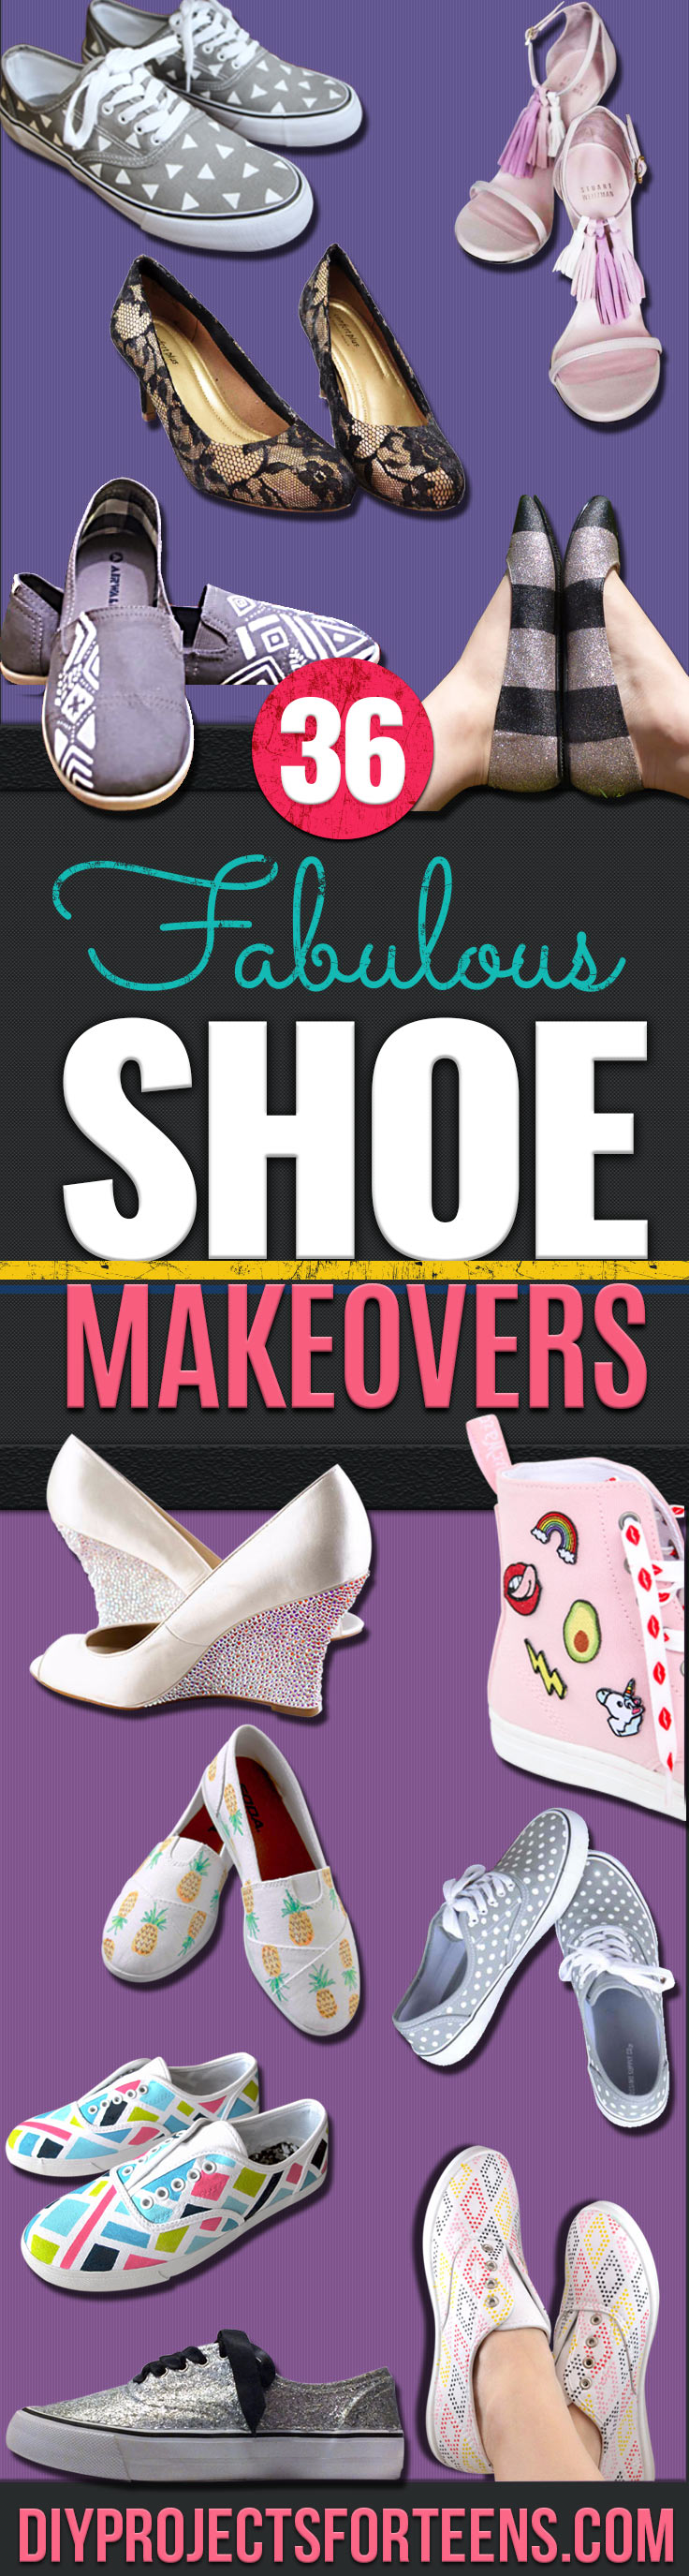 DIY Shoe Makeovers - Cool Ways to Update, Decorate, Paint, Bedazle and Add Sparkle to Your Flats, Pumps, Tennis Shoes, Boots and Boring Shoes - Cool Crafts and DIY Shoe Ideas for Teens and Adults